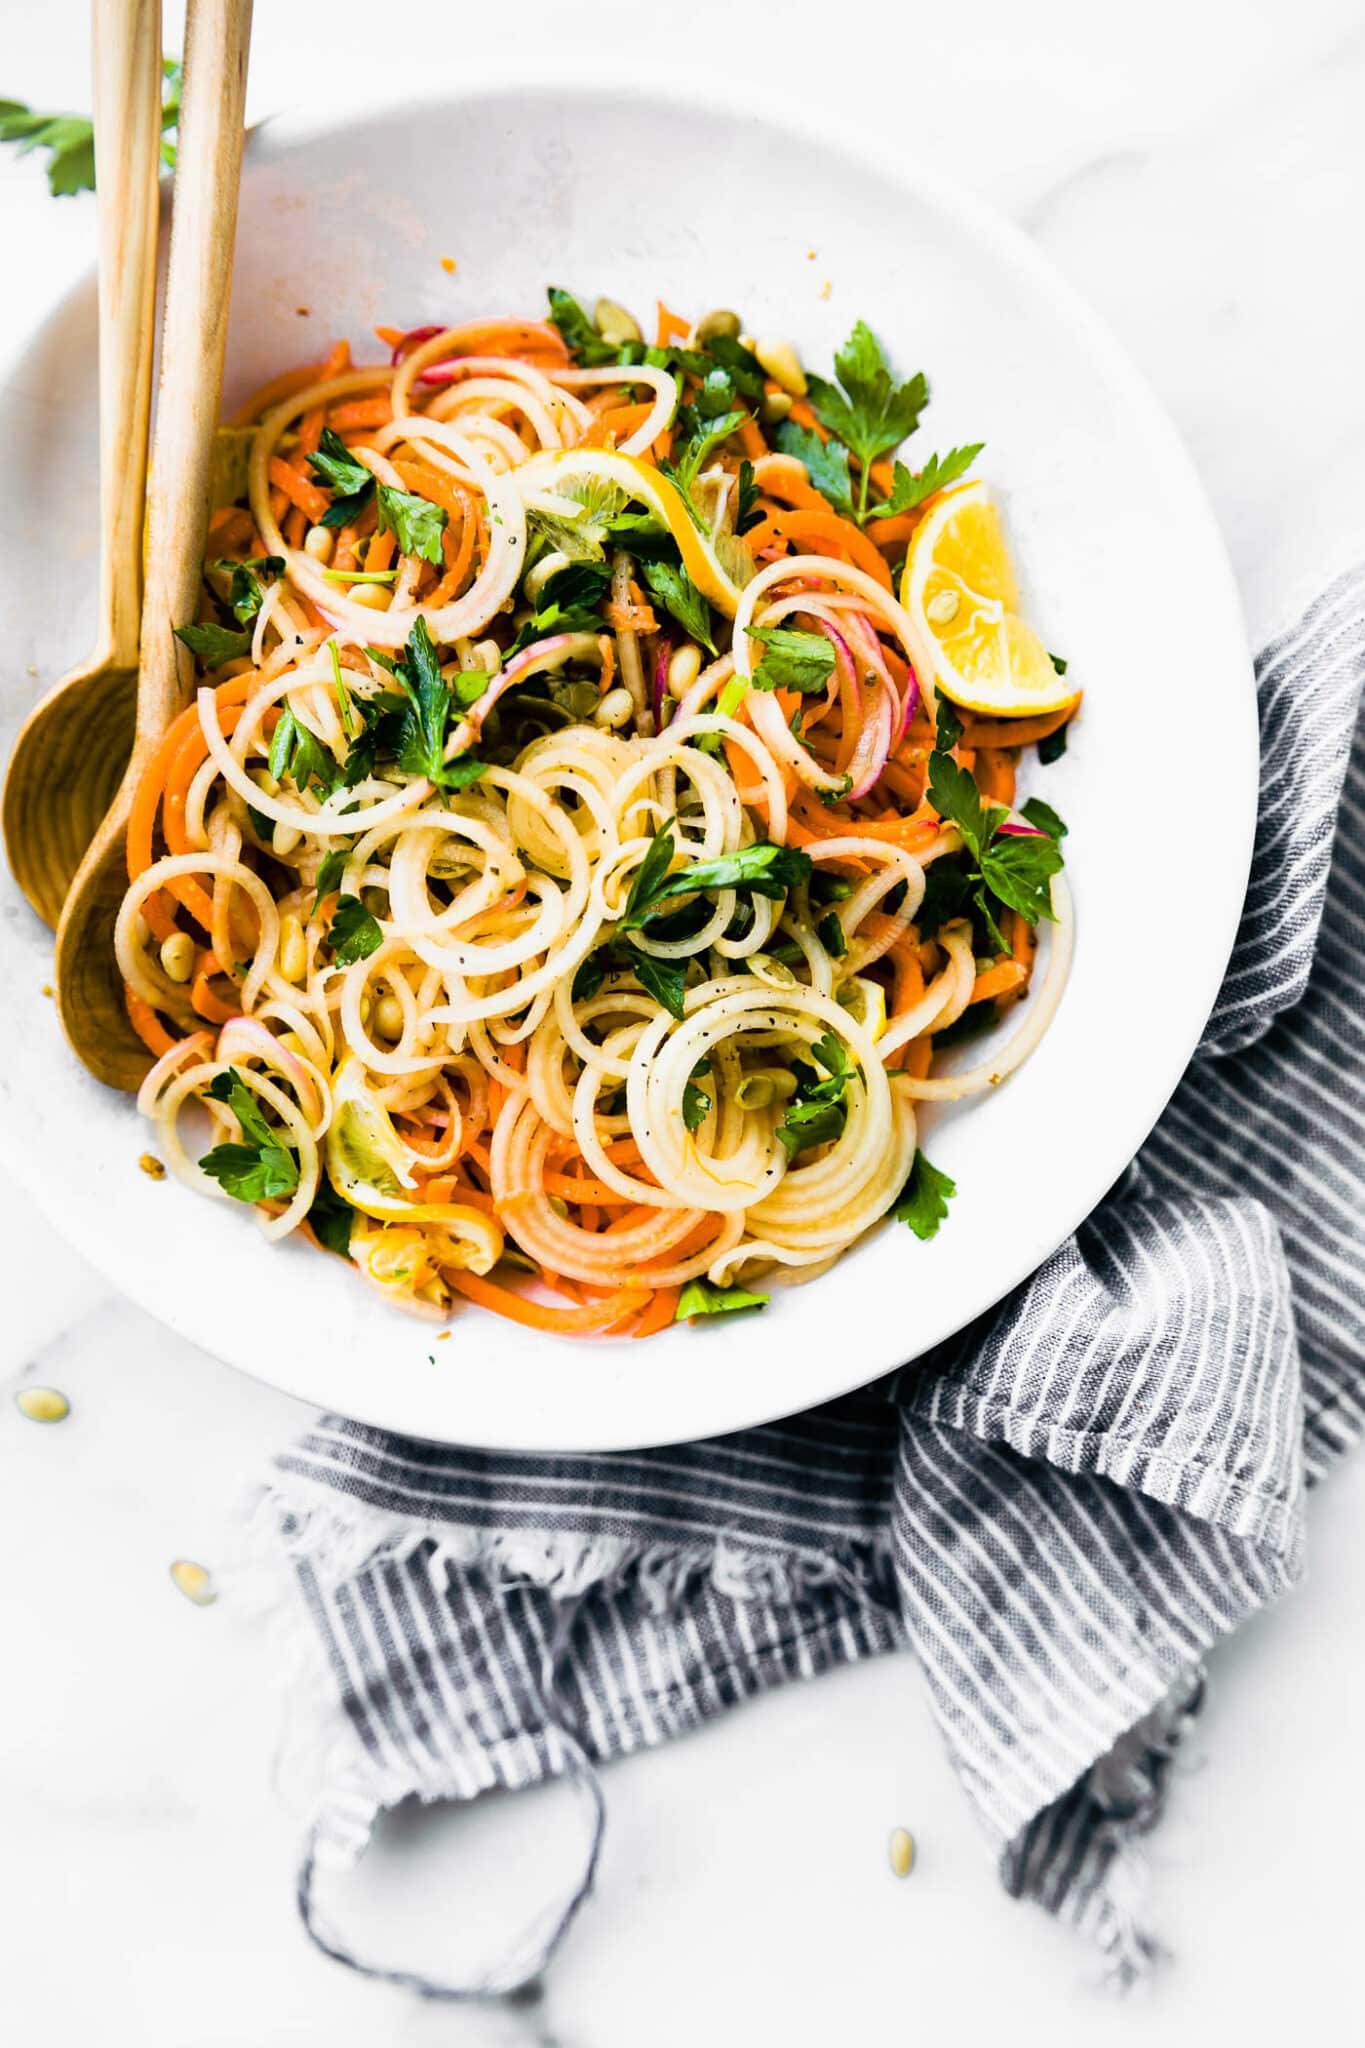 Overhead view carrot and celery root spiralized 'noodles' salad in white bowl.